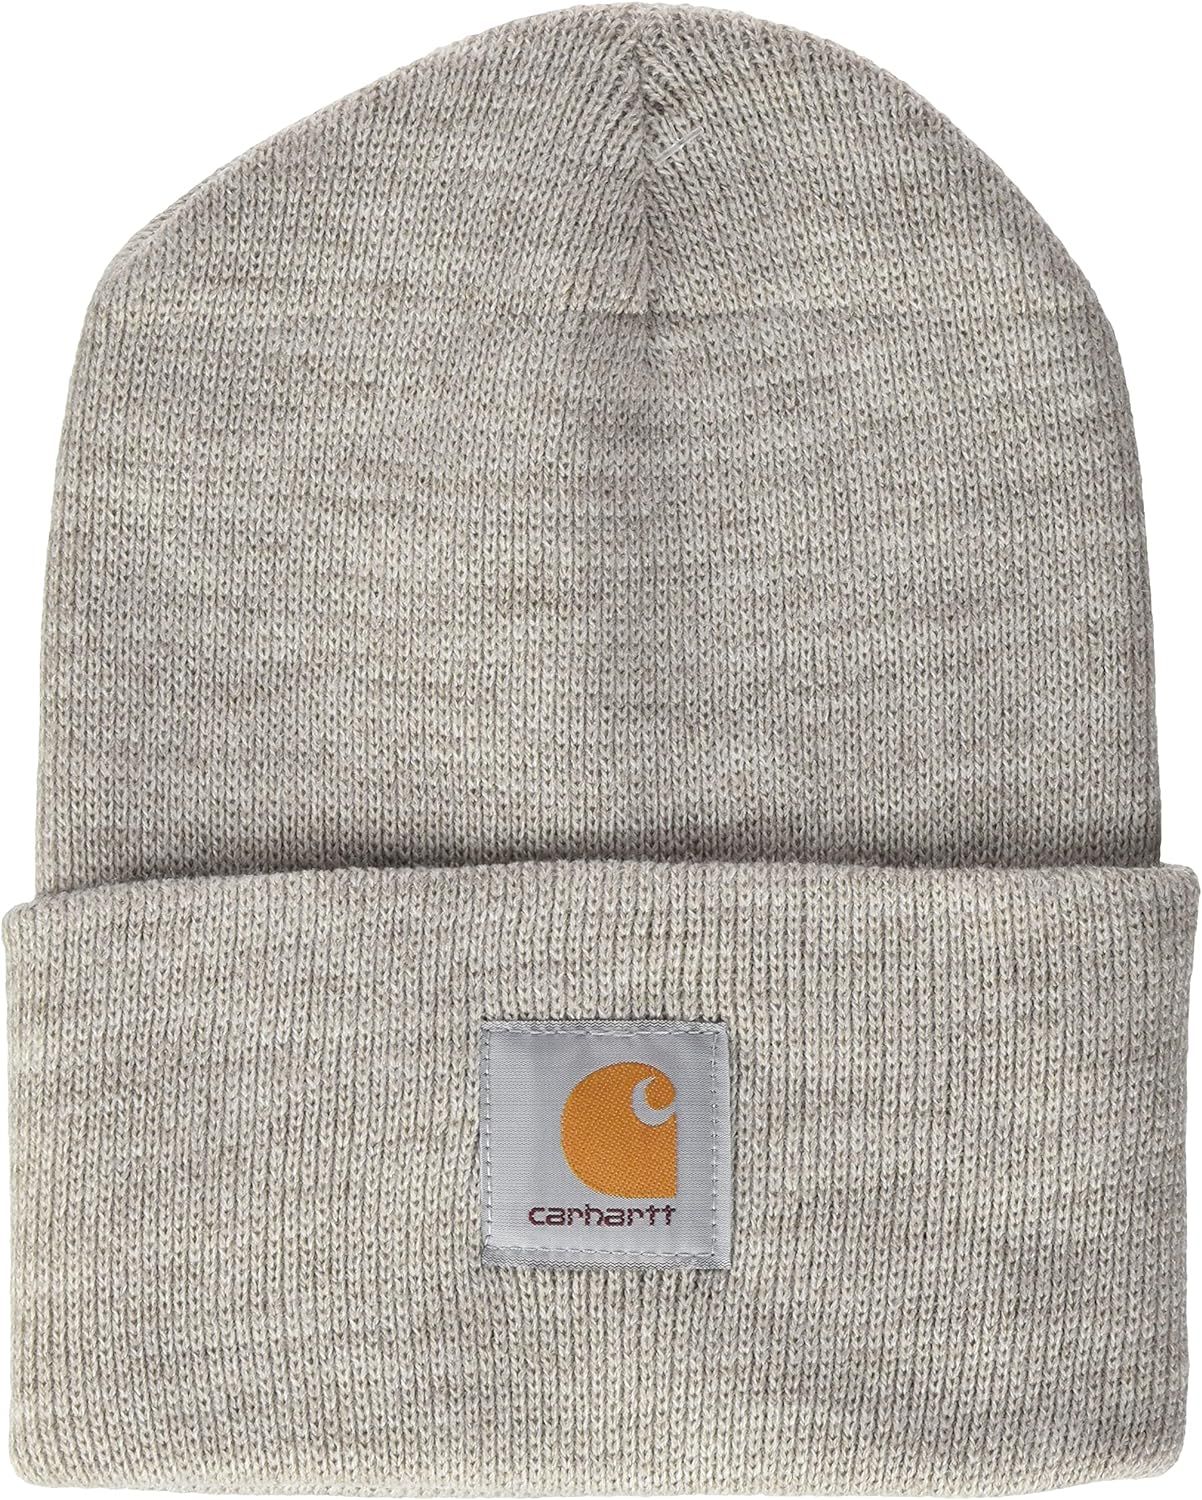 Carhartt Men's Knit Cuffed Beanie, Alabaster Heather, One Size at Amazon Men’s Clothing store | Amazon (US)